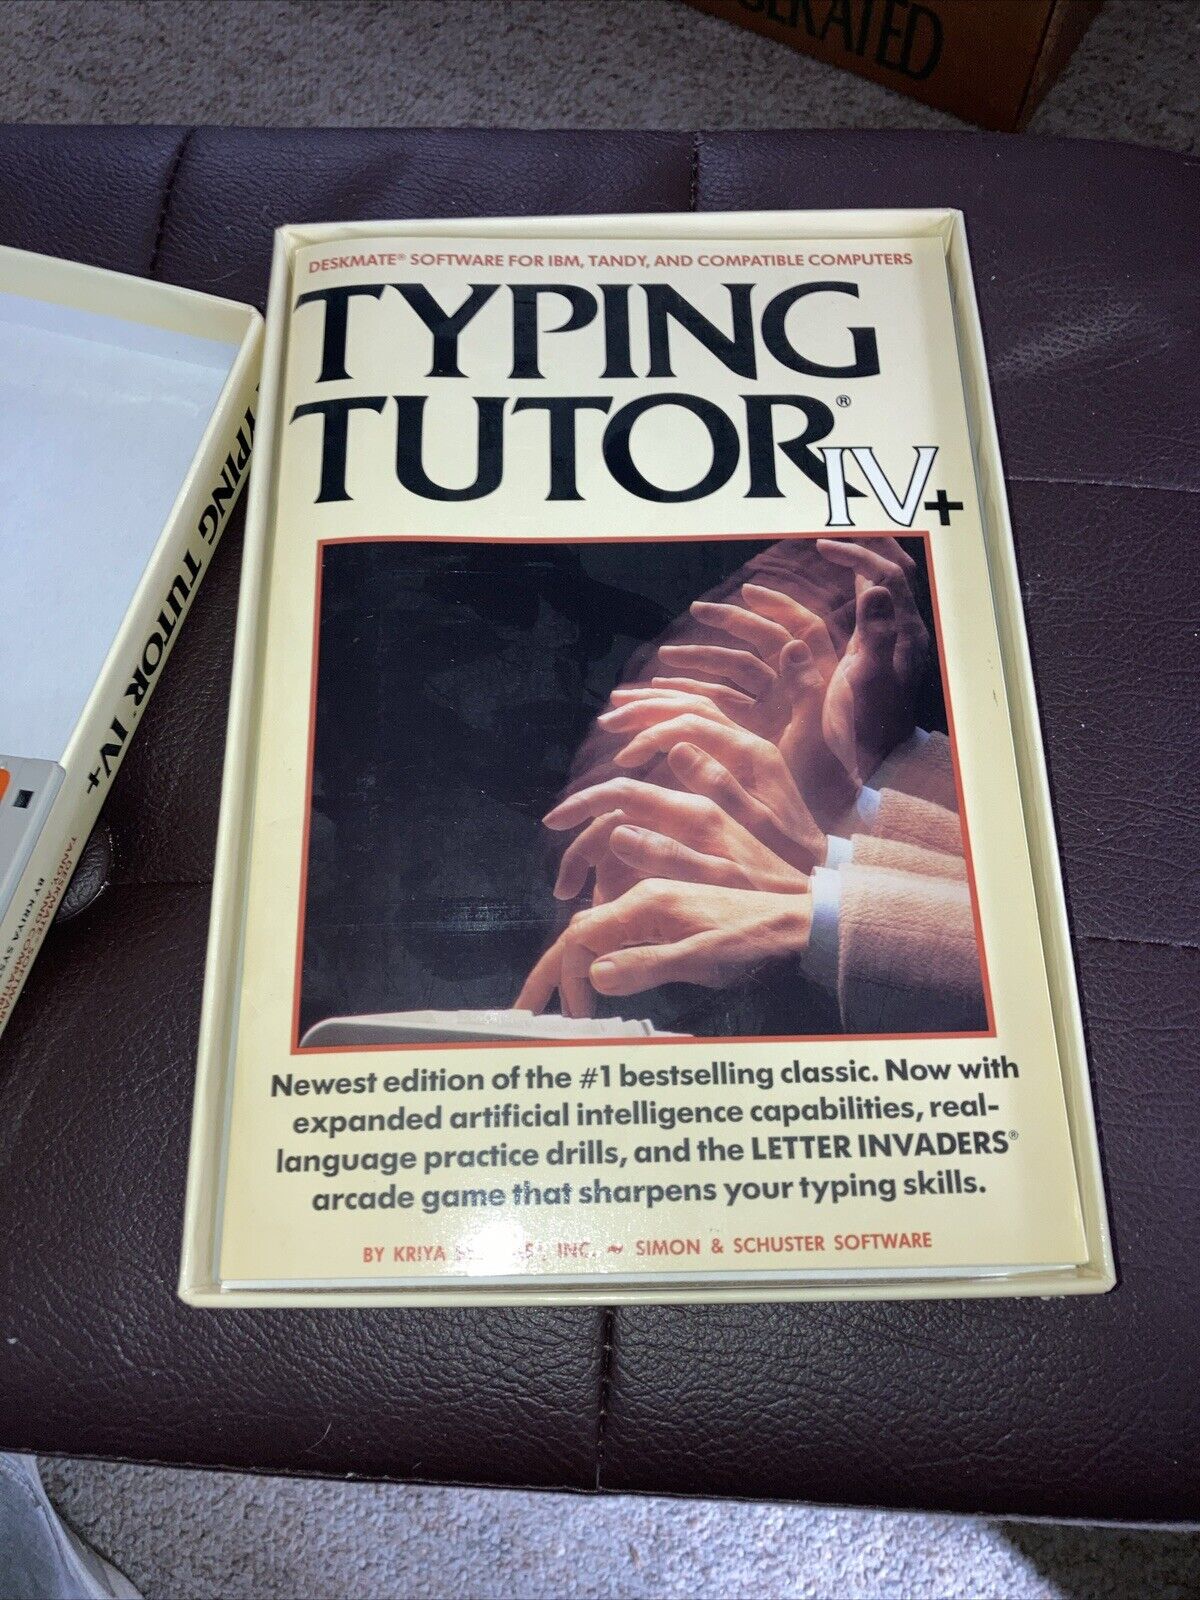 Commodore 64 (C64) Typing Tutor IV: - w/  Letter Invaders Floppy Disk